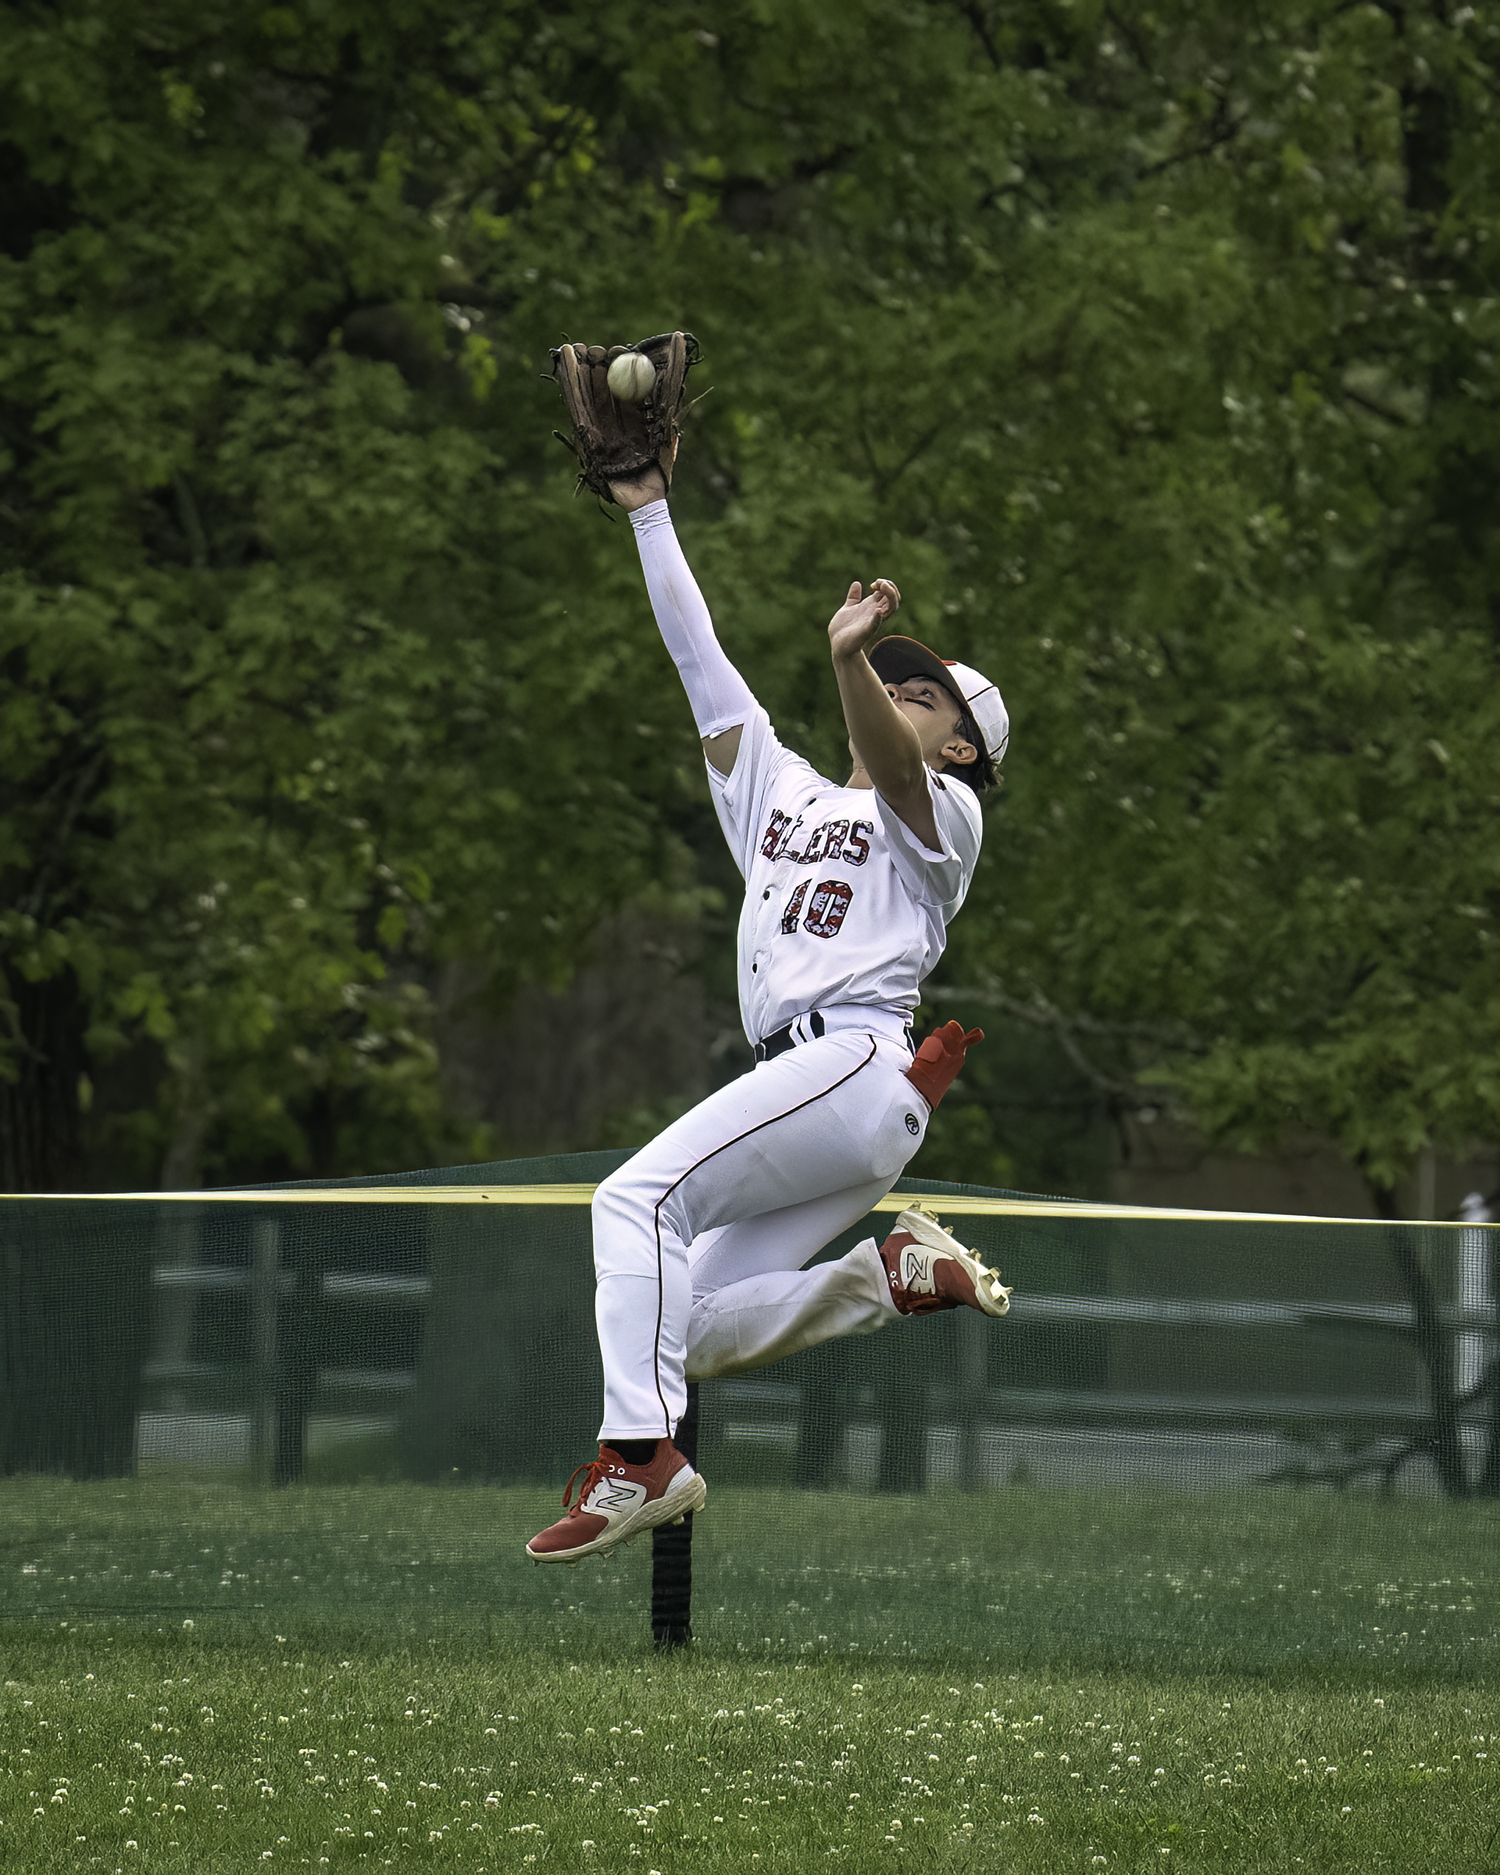 Whaler Max Krotman leaps and makes the catch in right field.   MARIANNE BARNETT